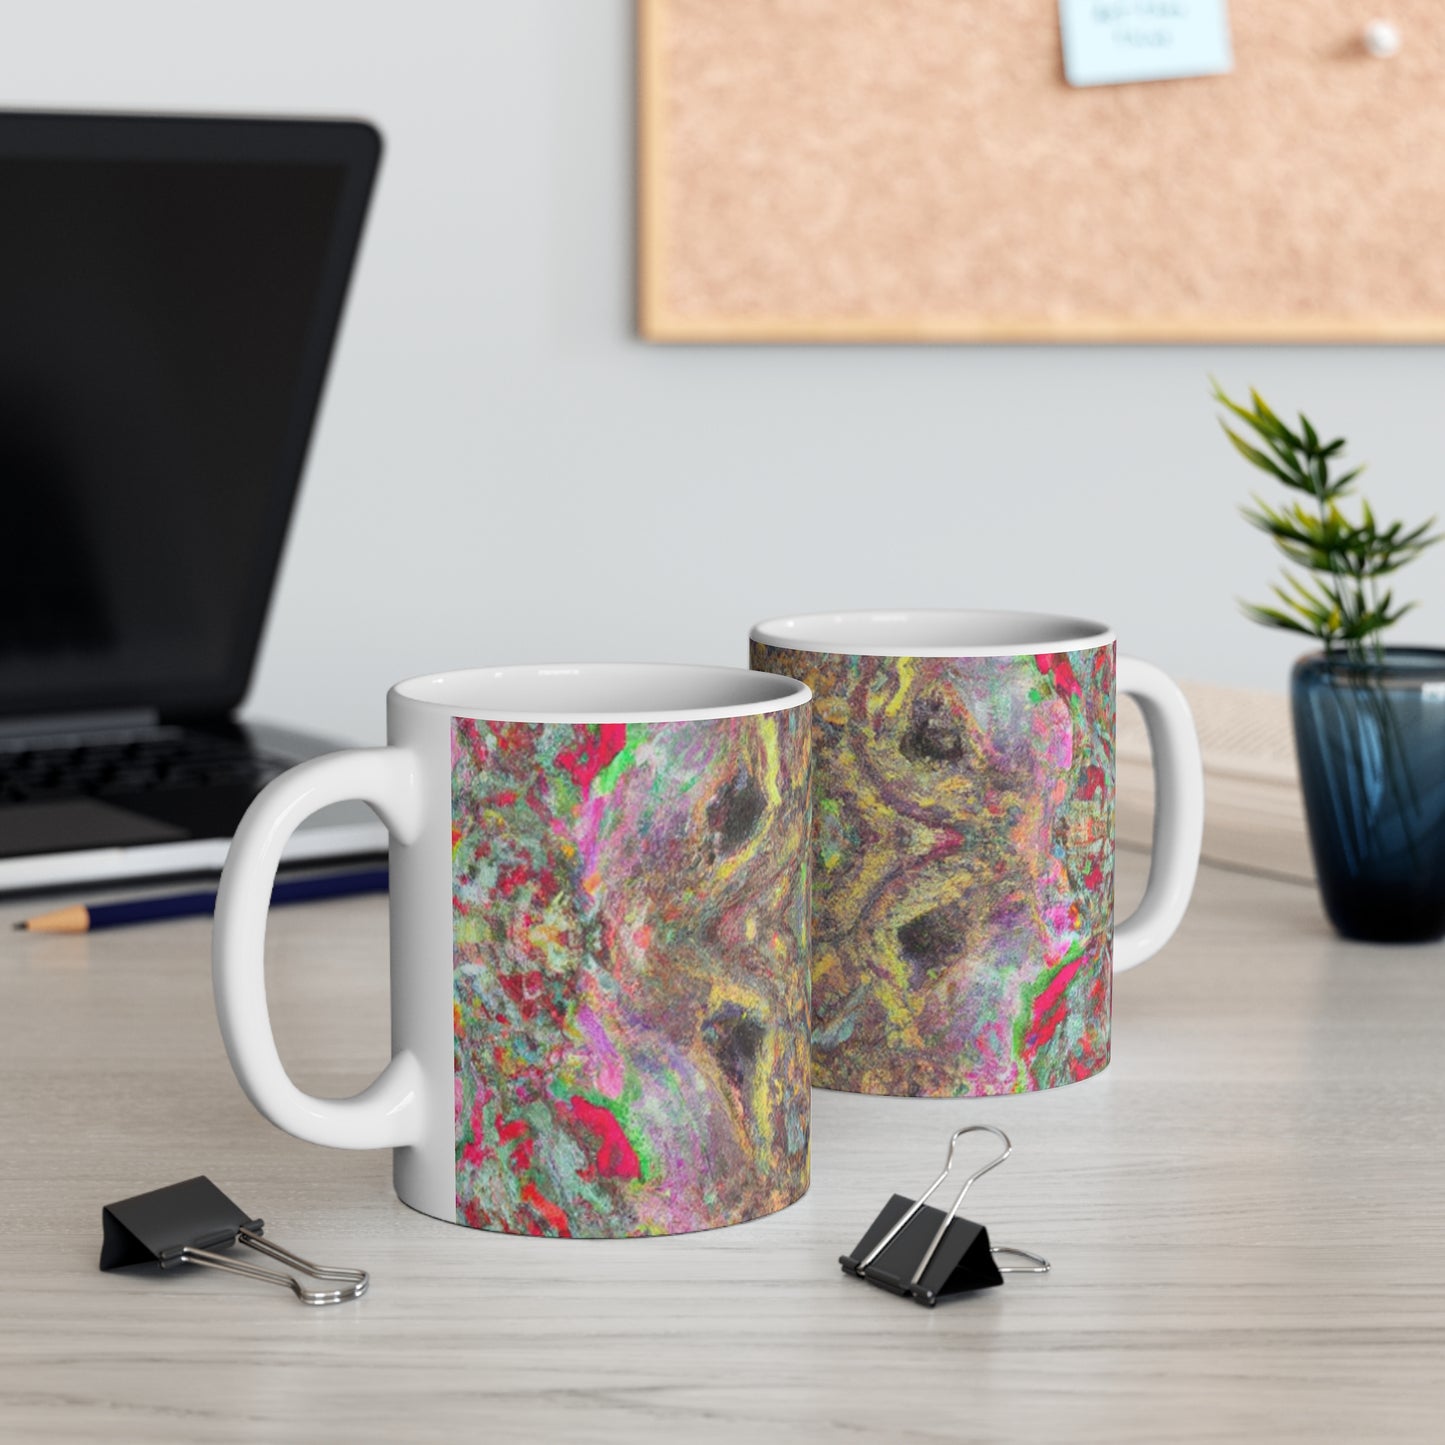 Nel's Classic Coffee - Psychedelic Coffee Cup Mug 11 Ounce